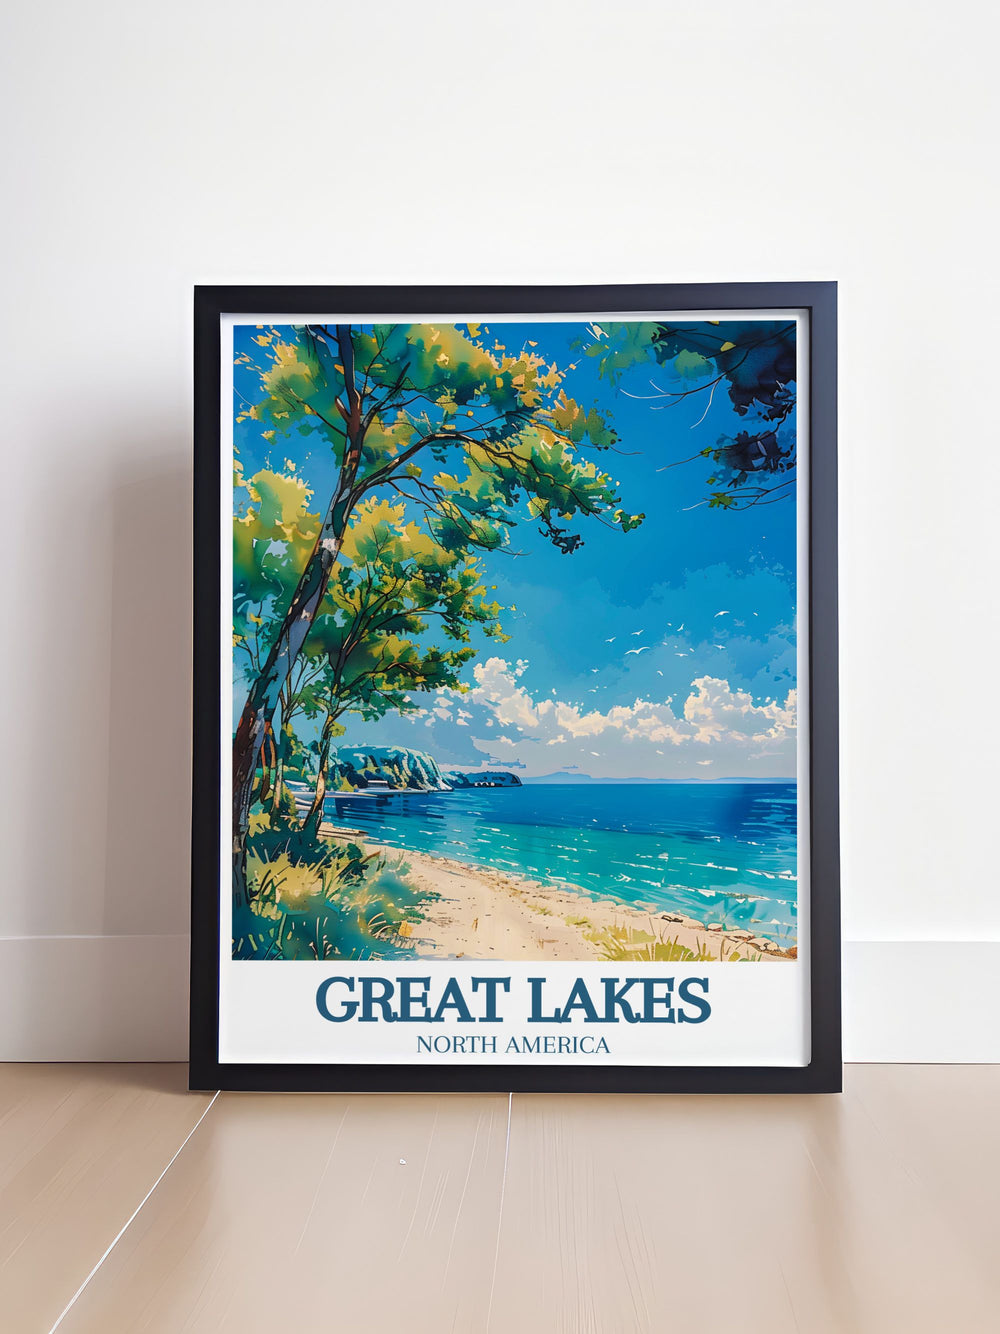 This travel poster features a detailed illustration of Lake Erie, showcasing its calm waters and picturesque shoreline, perfect for adding a touch of natural beauty to your home decor.